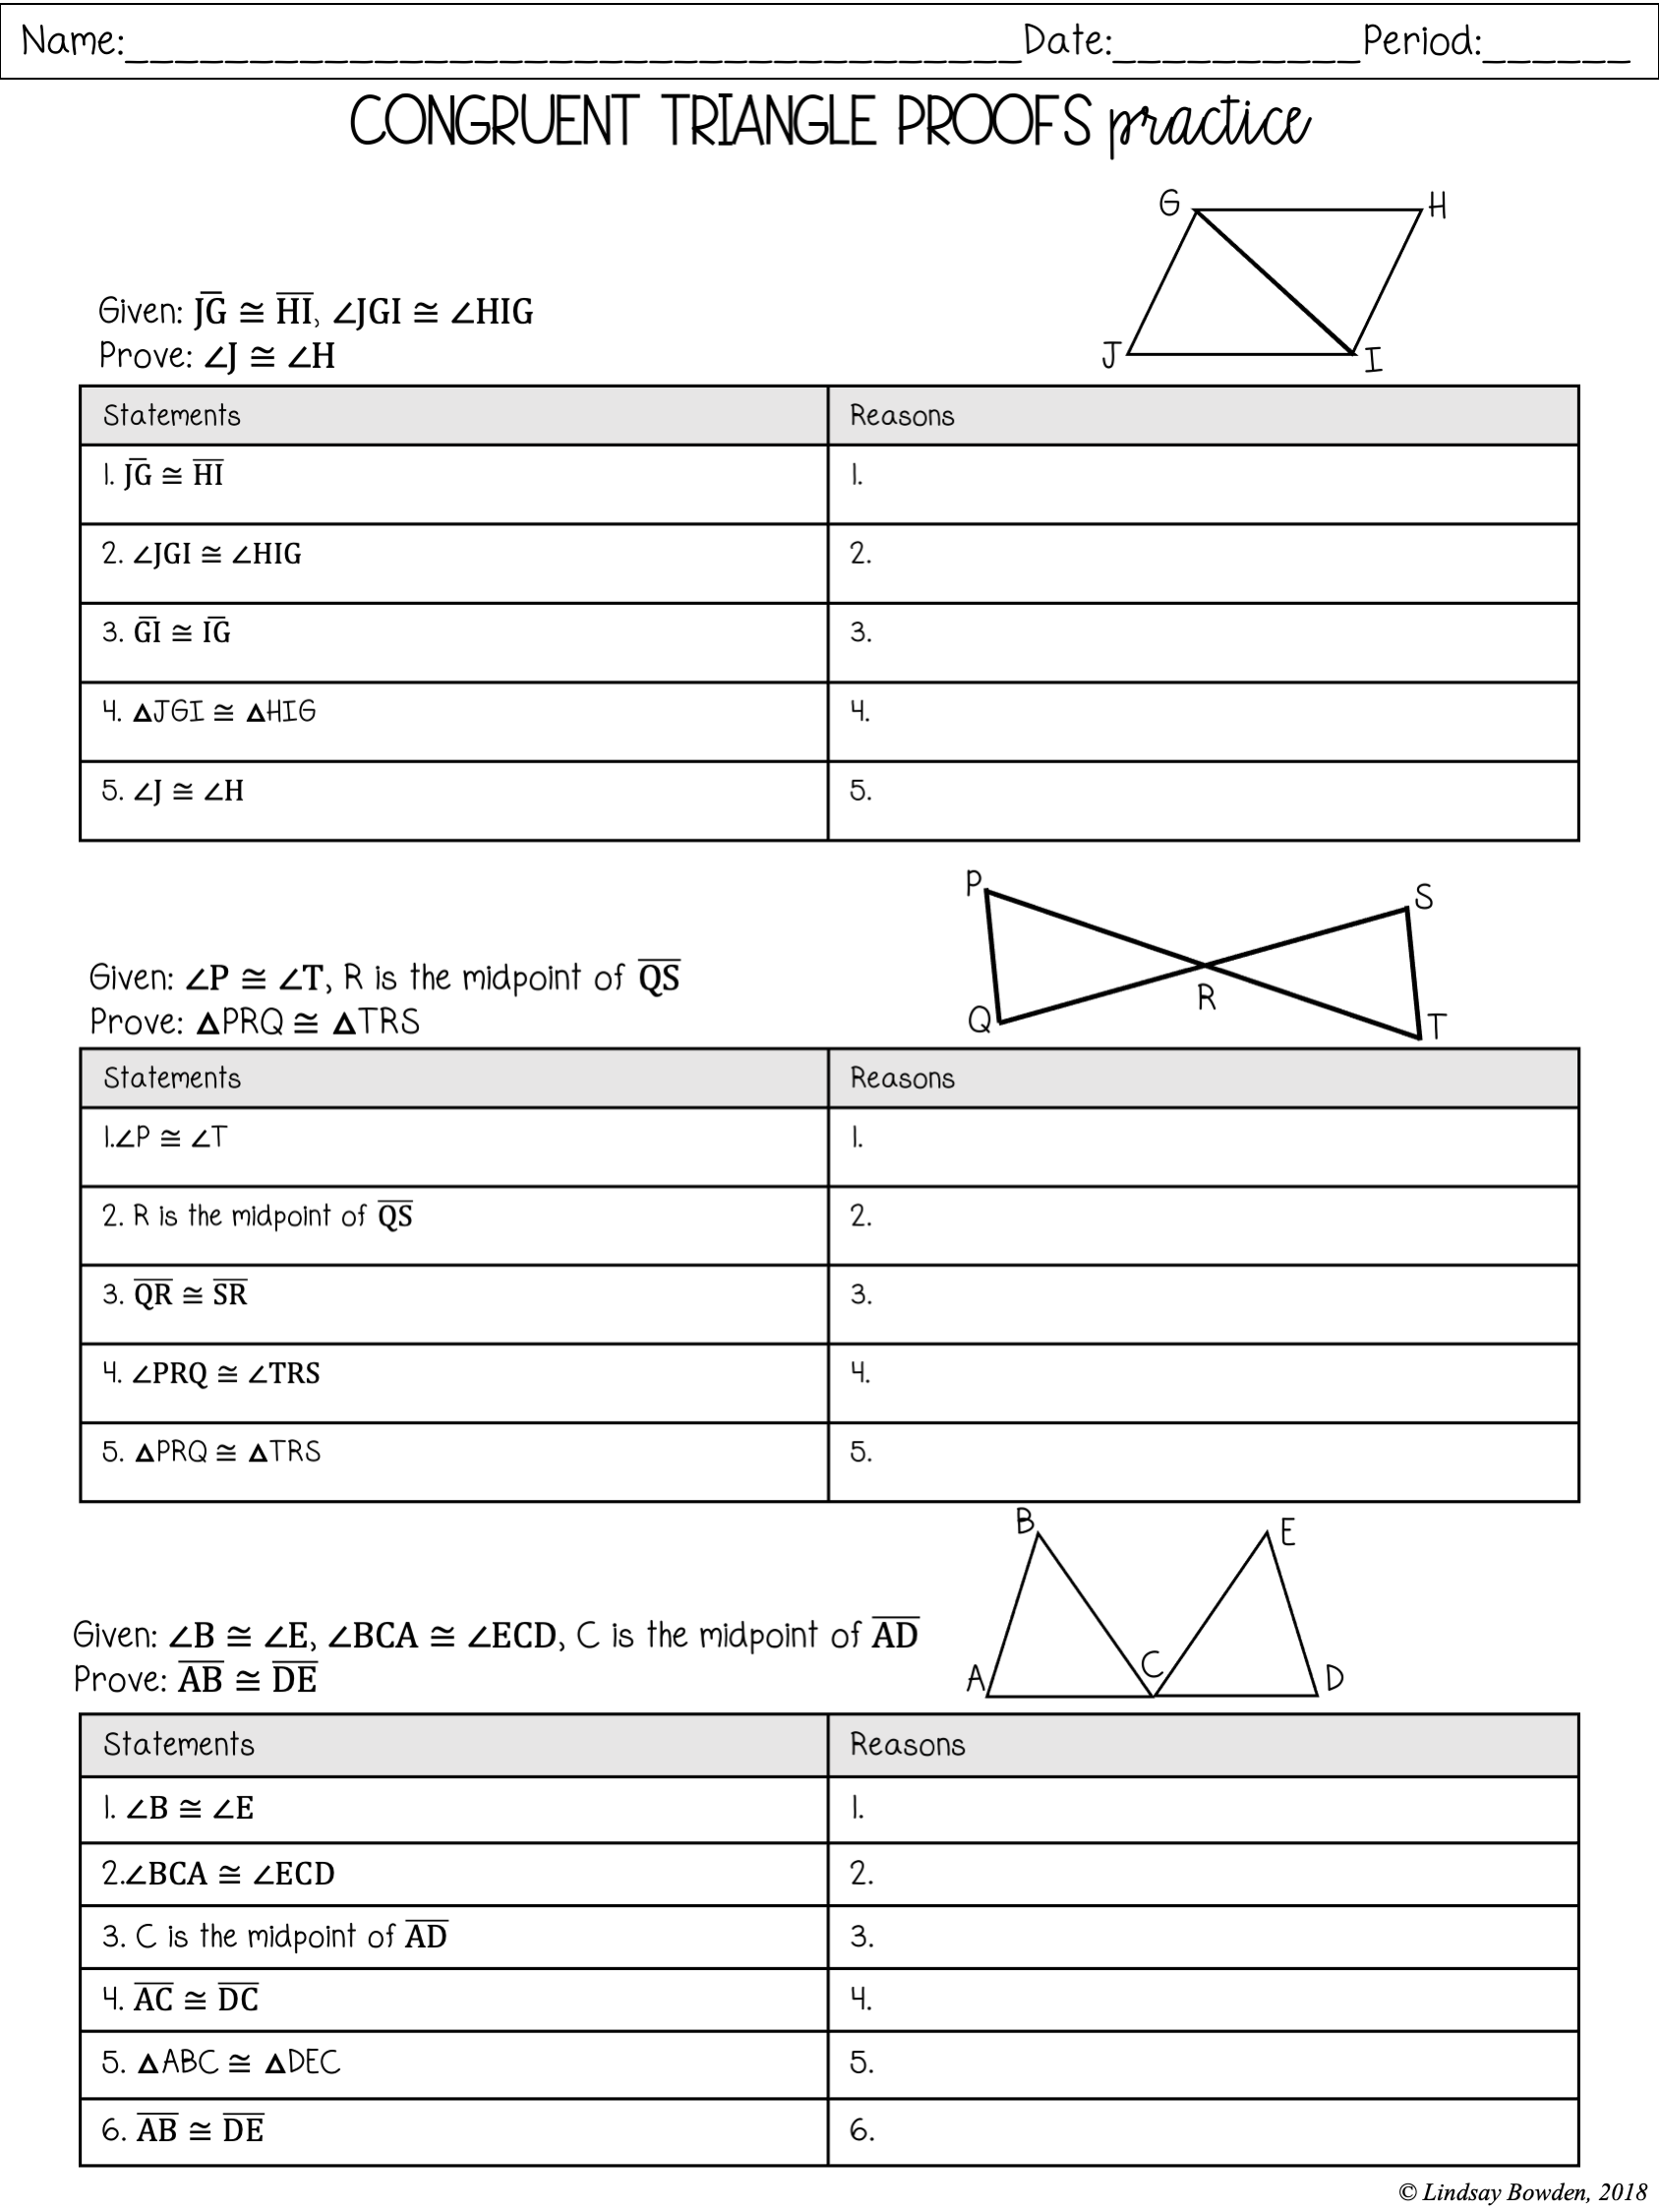 Congruent Triangles Notes and Worksheets - Lindsay Bowden Pertaining To Triangle Proofs Worksheet Answers